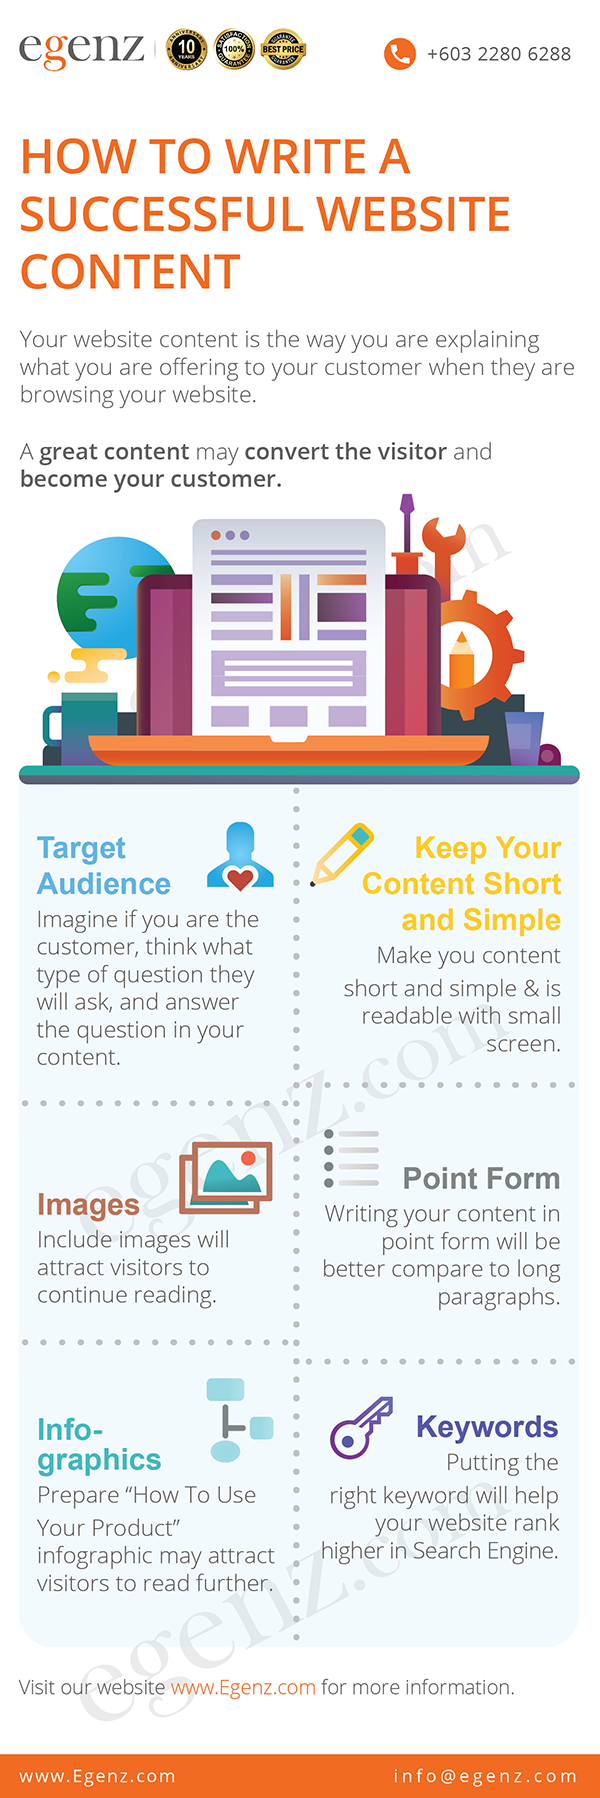 Infographic-How-to-write-a-successful-website-content